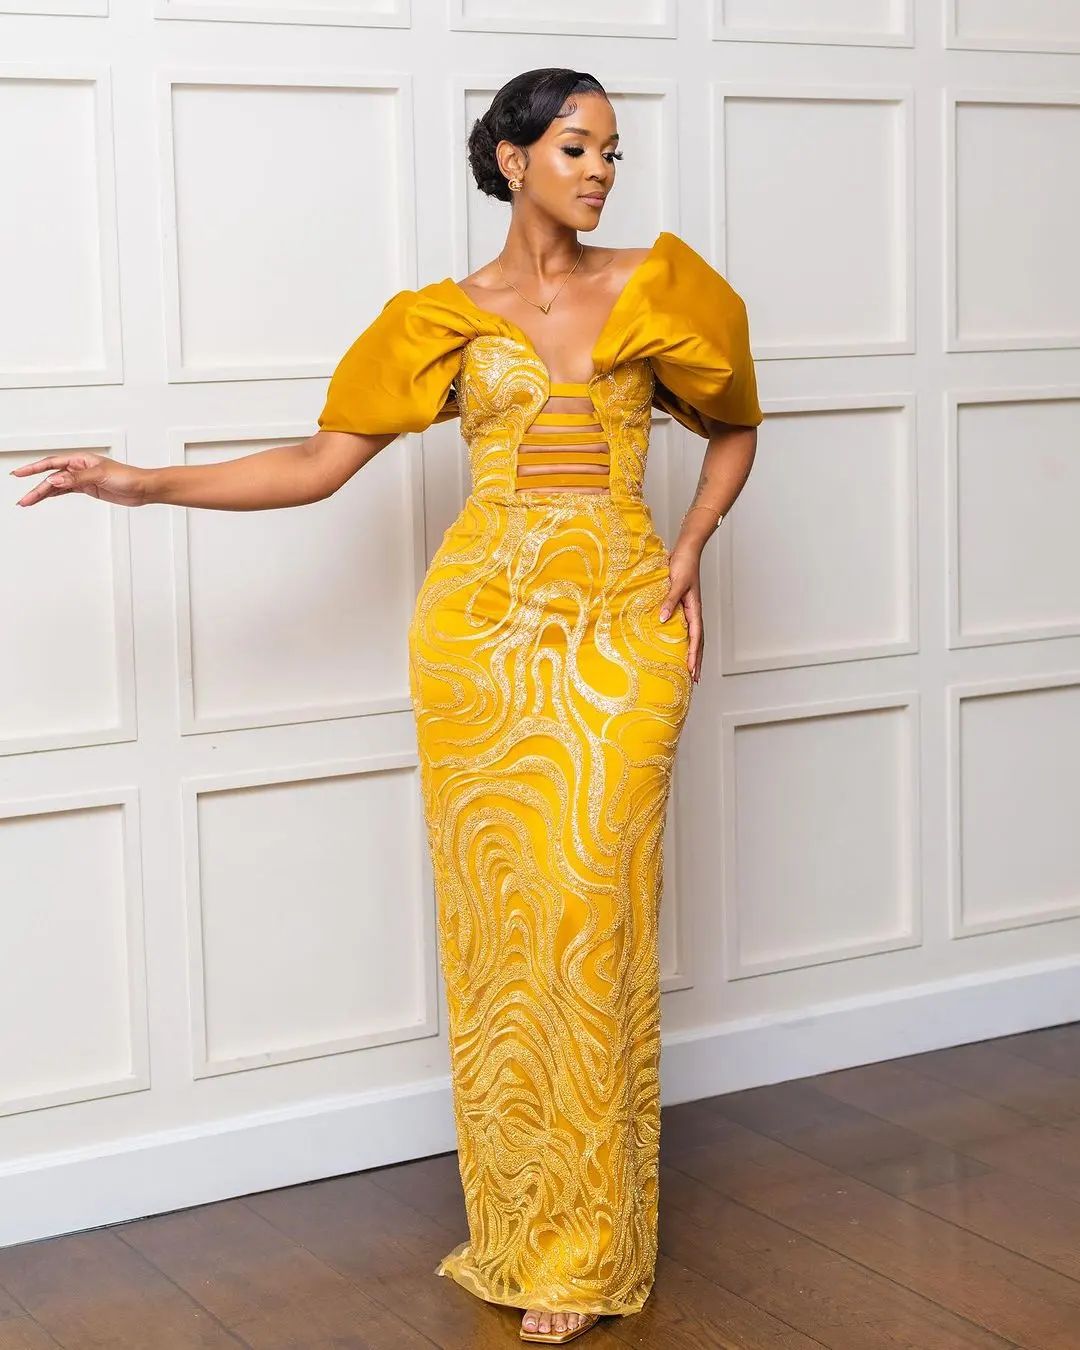 15+ Mindblowing And Gorgeous Ankara Styles Dresses To Styles Your Next Look